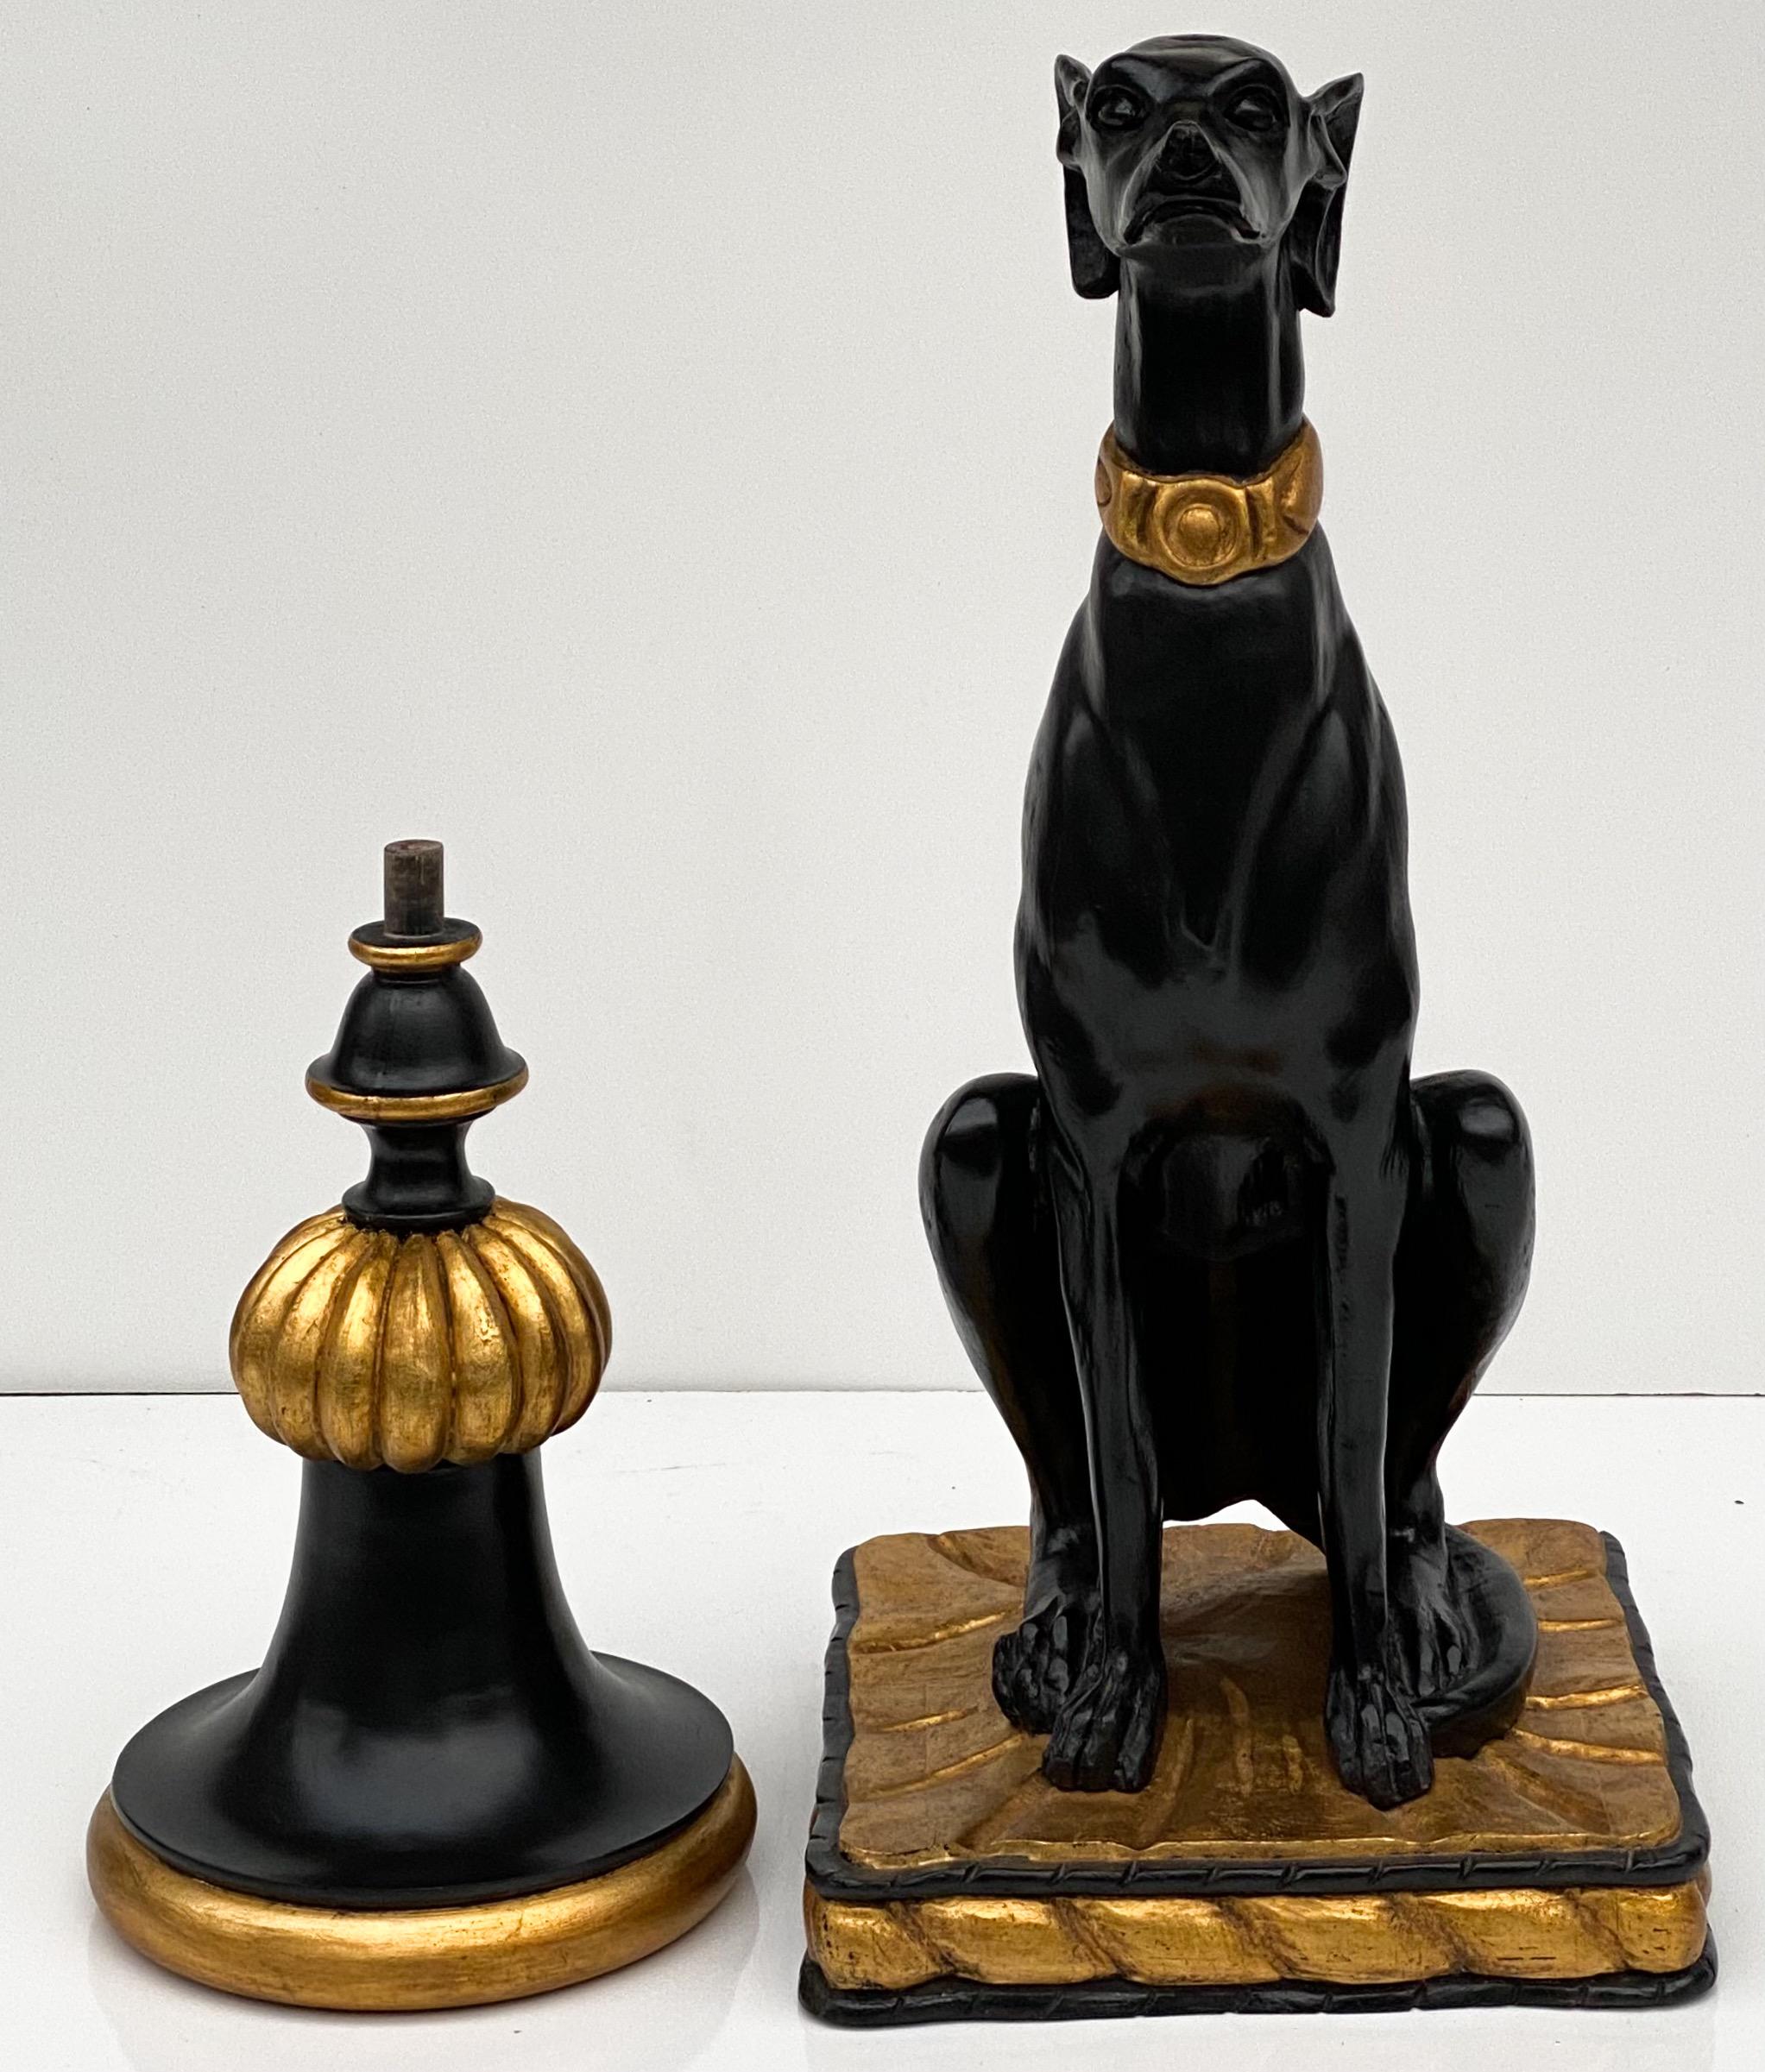 This is a gilt and black lacquer Regency style seated greyhound. It has a carved wood removable planter,  but the body is cast resin. The planter is removable. It is unmarked and in very good condition. The planter is attributed to Maitland- Smith.